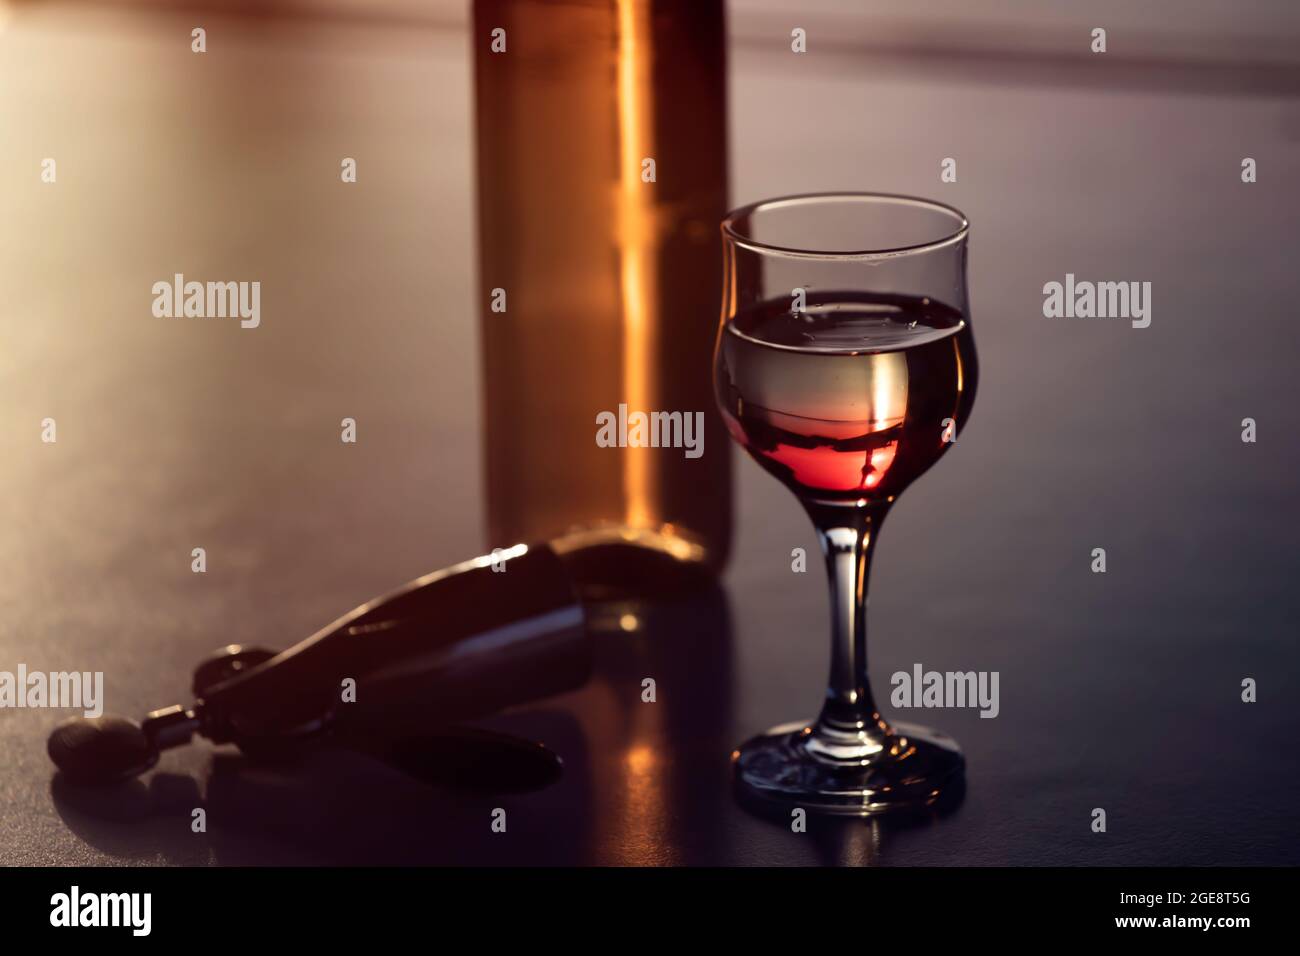 https://c8.alamy.com/comp/2GE8T5G/wine-tasting-experience-at-the-wine-bar-red-wine-on-the-table-2GE8T5G.jpg